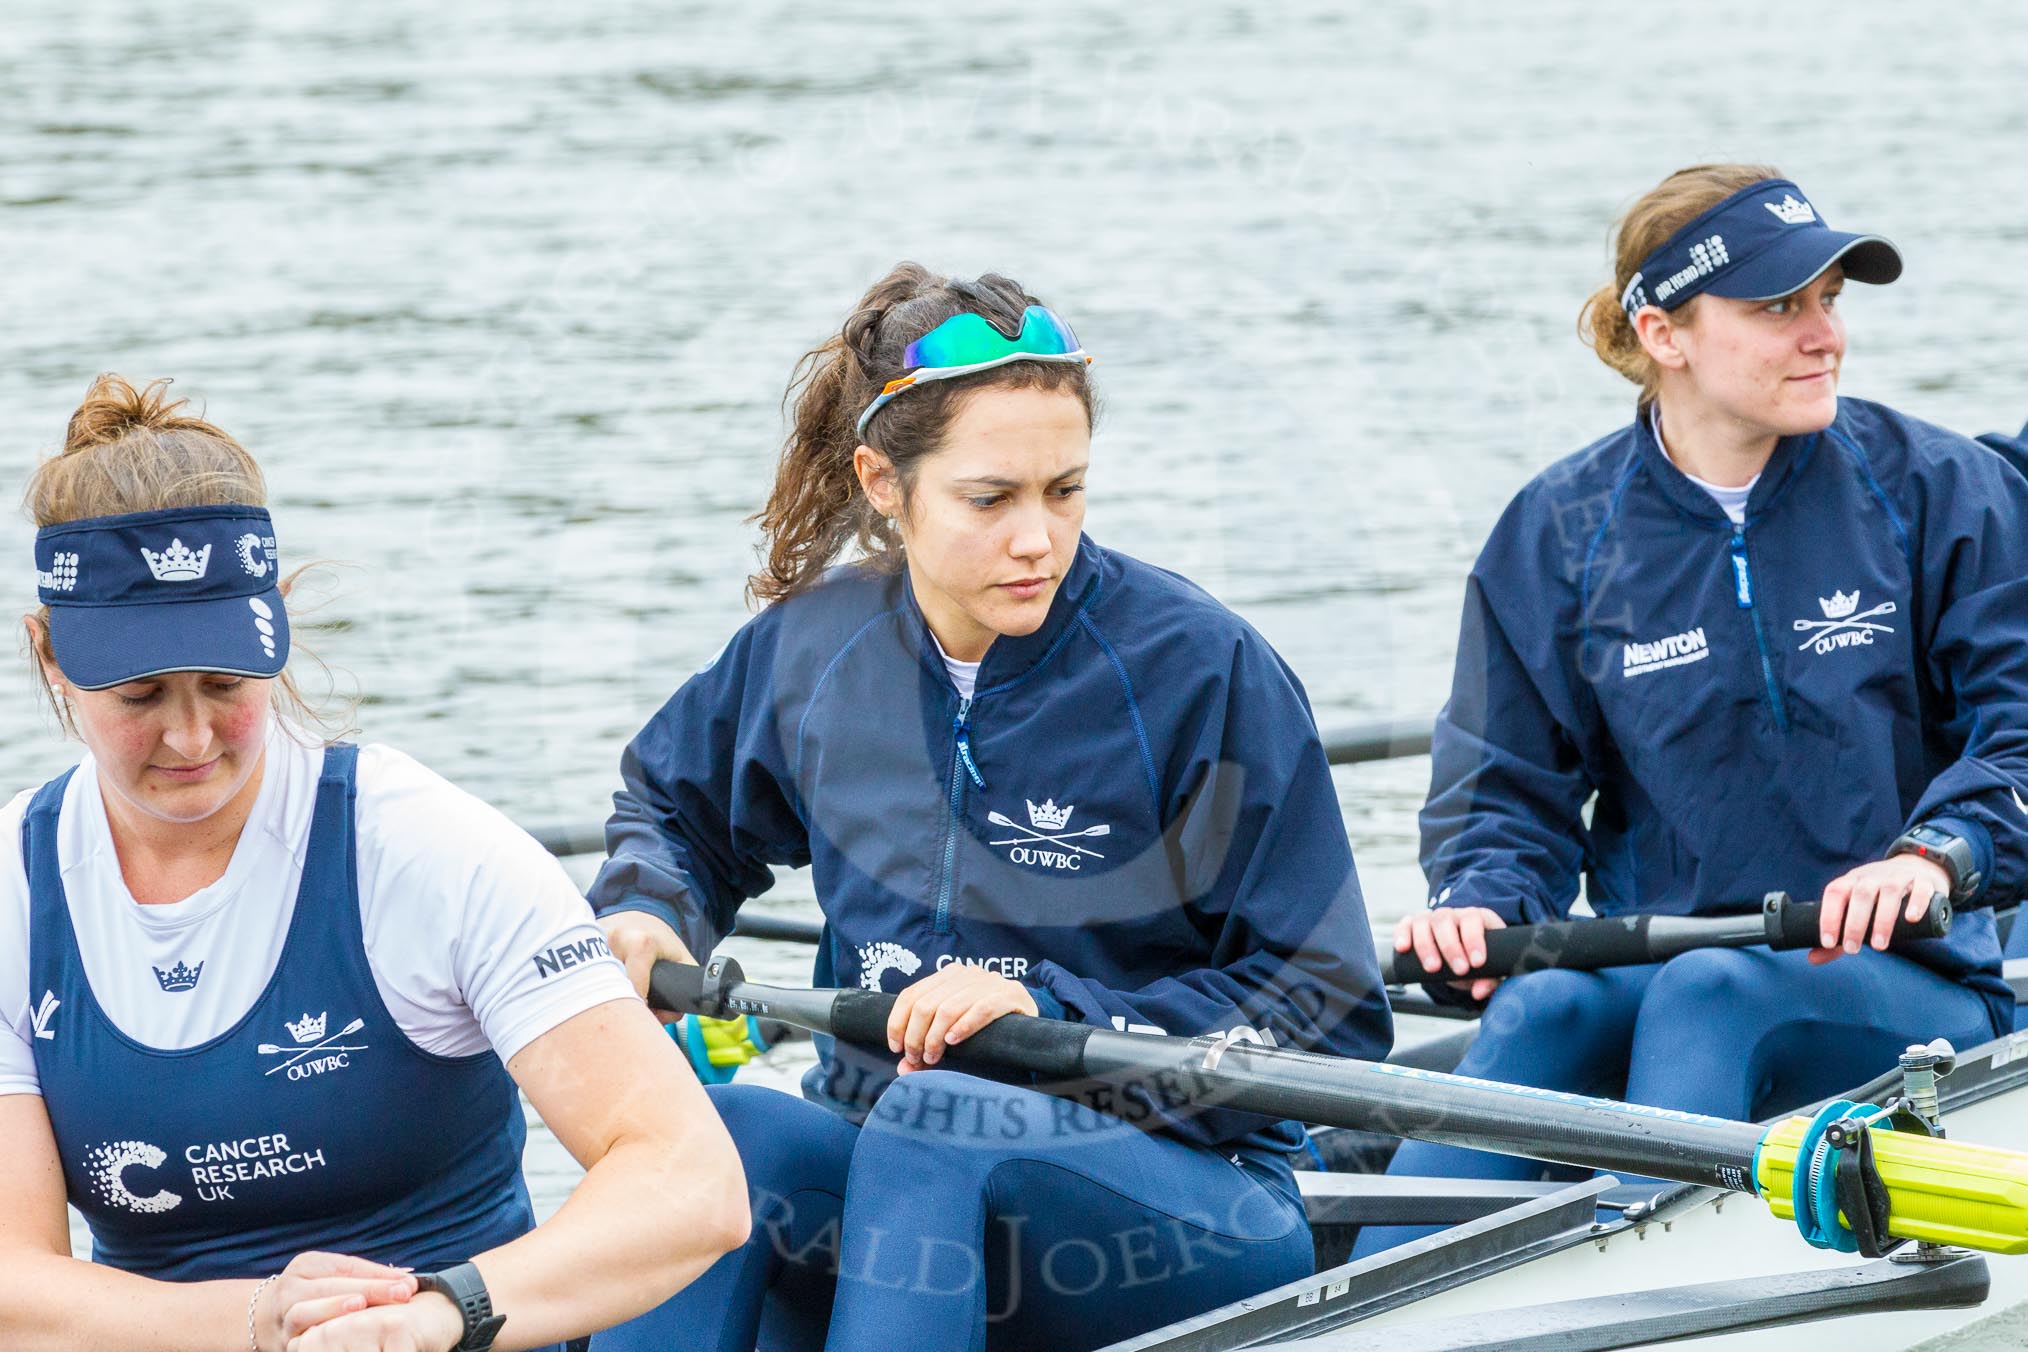 The Cancer Research UK Boat Race season 2017 - Women's Boat Race Fixture OUWBC vs Molesey BC: OUWBC getting their boat ready for the fixture, here 6 seat Harriet Austin, 5 seat Chloe Laverack and  4 seat Rebecca Esselstein.
River Thames between Putney Bridge and Mortlake,
London SW15,

United Kingdom,
on 19 March 2017 at 15:20, image #13